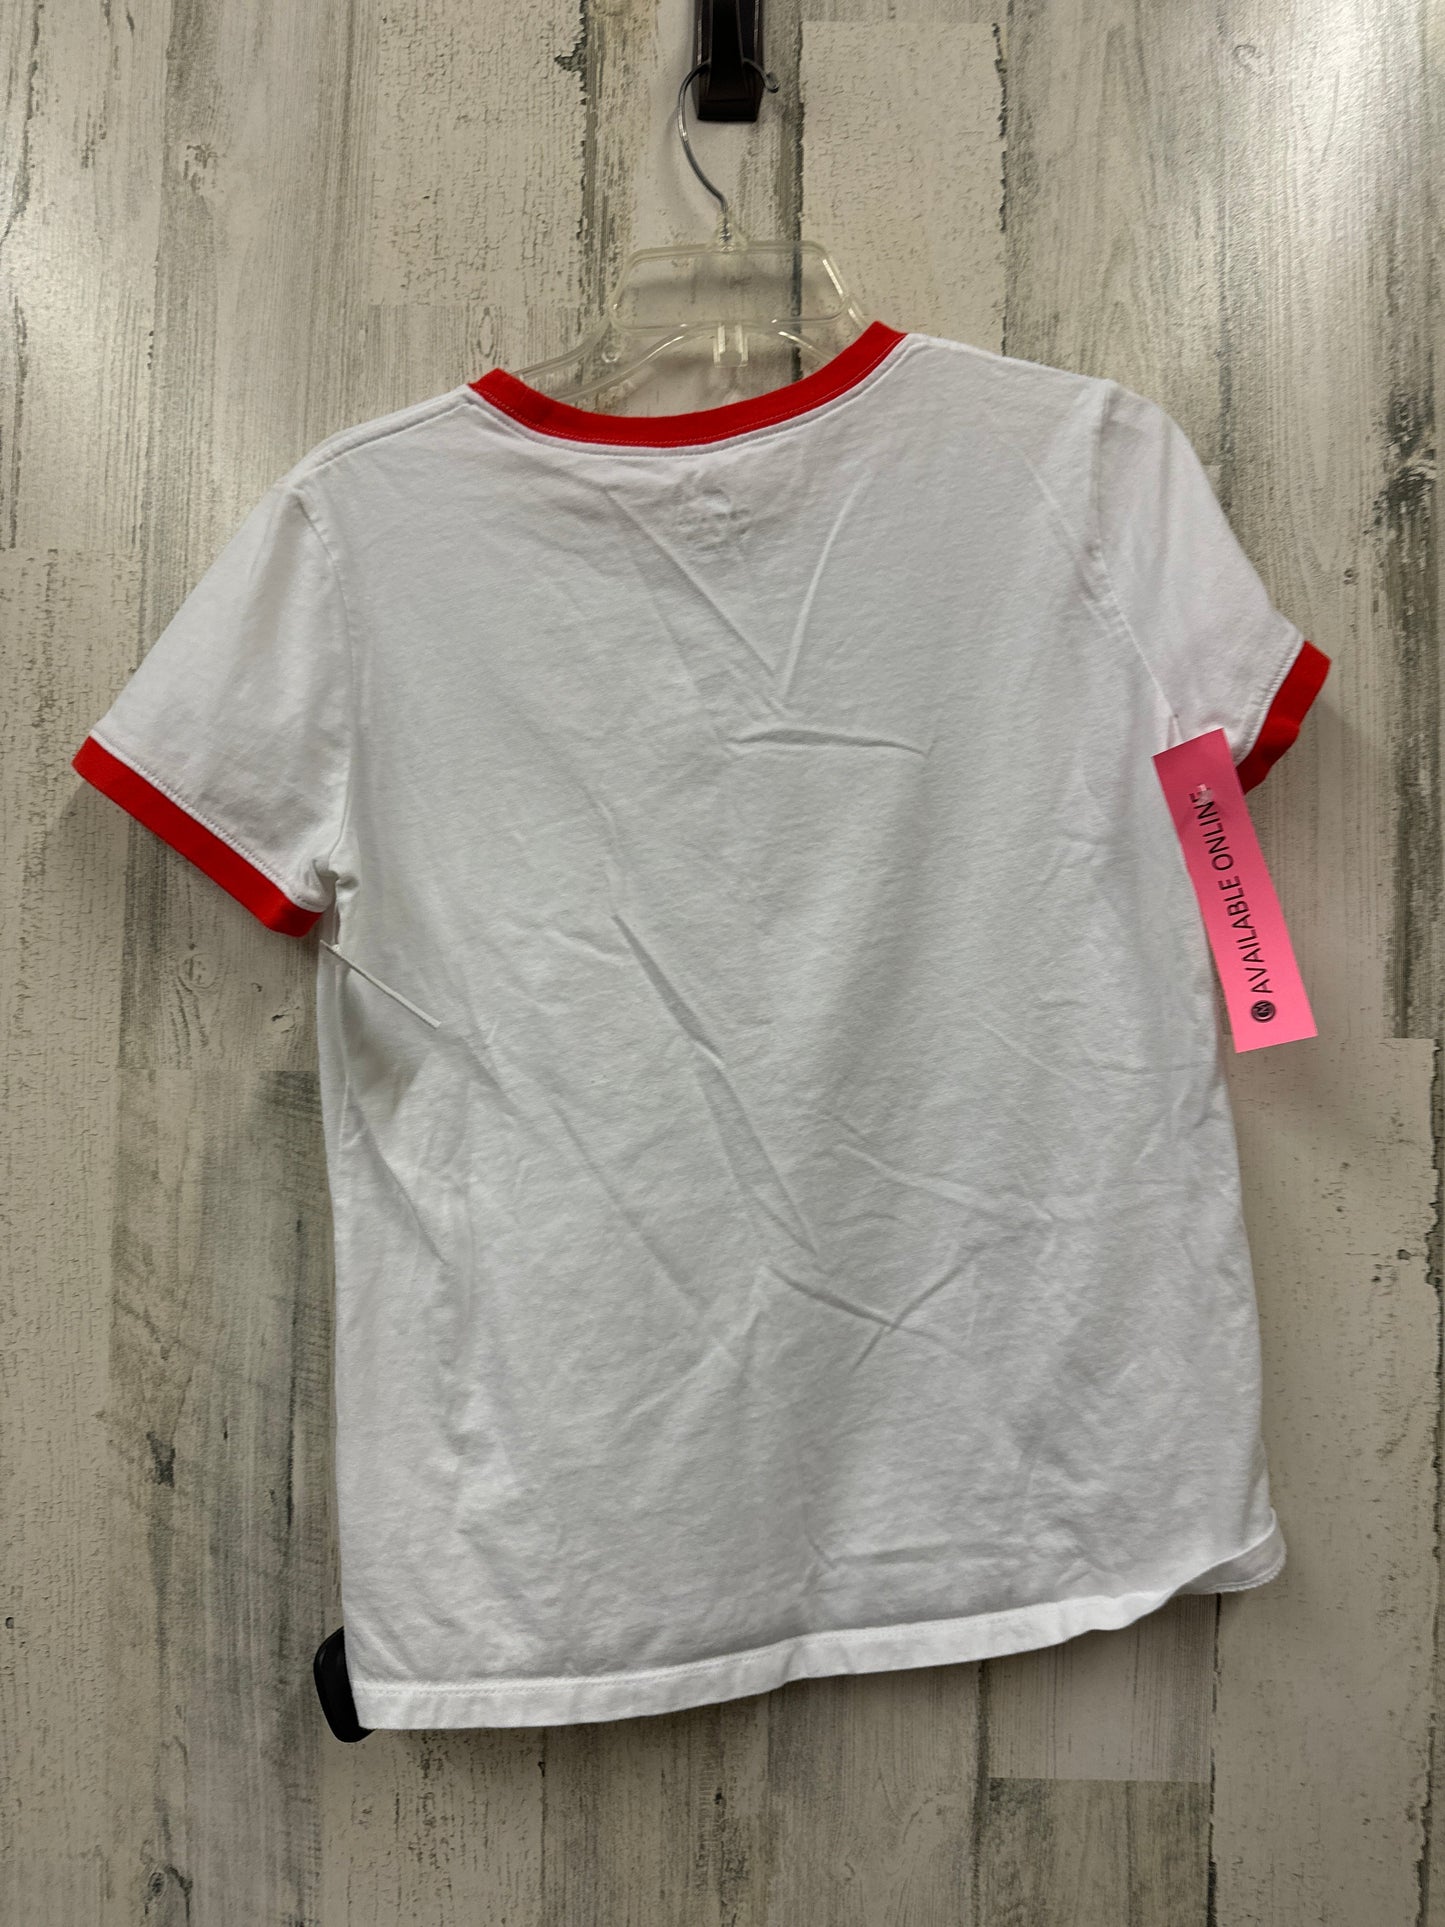 White Top Short Sleeve Nike Apparel, Size M